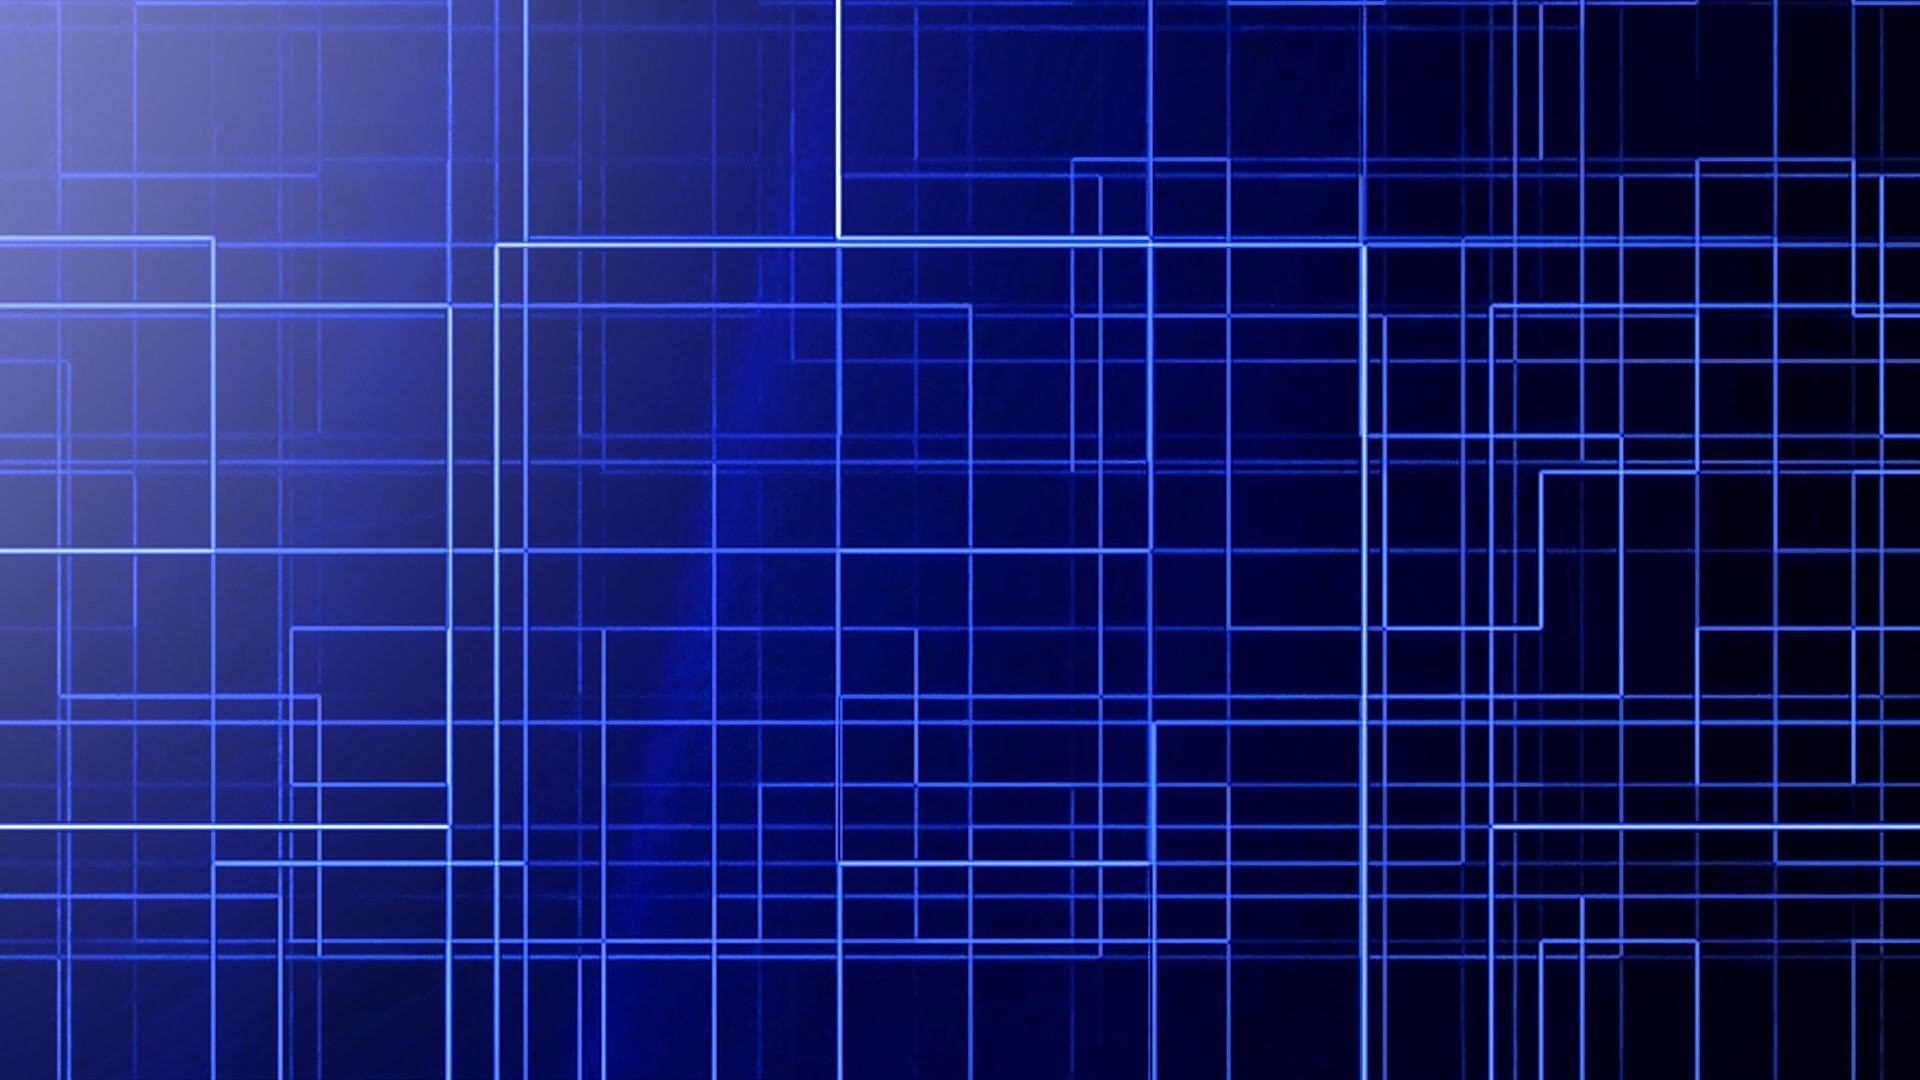 1920x1080, Tech Background Images 8 Data Id 134669 - Background Blue  Technology Hd - 1920x1080 Wallpaper 